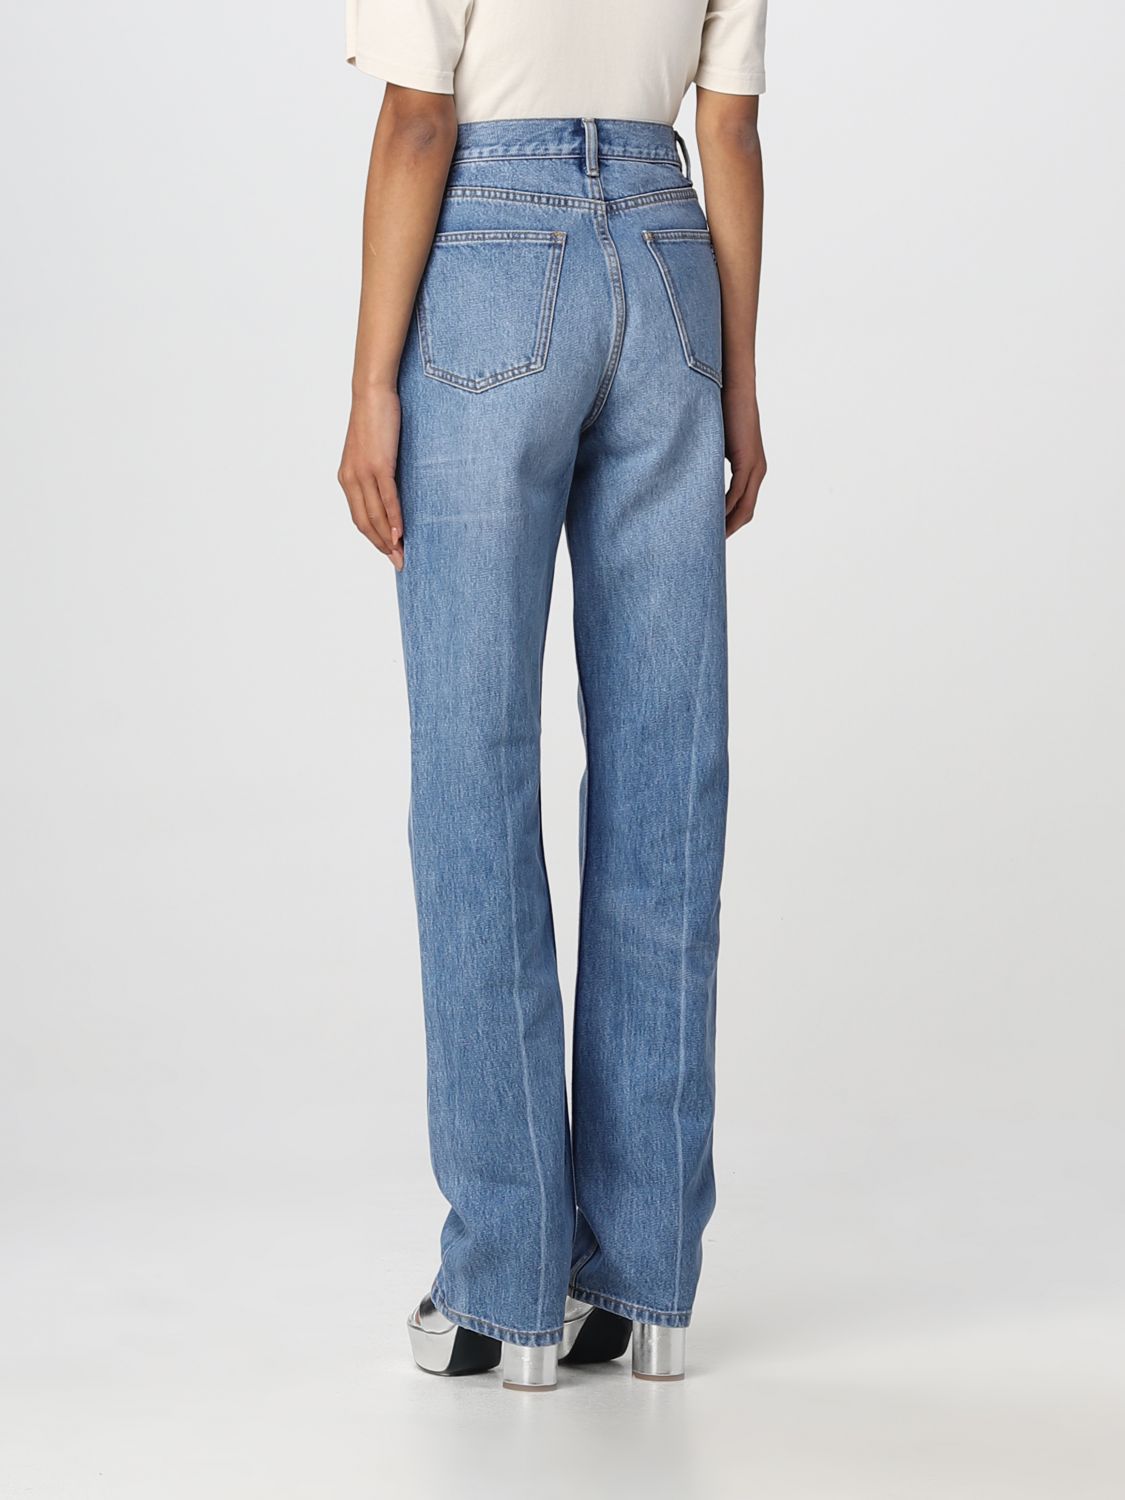 TORY BURCH: jeans for woman - Denim | Tory Burch jeans 147338 online on  